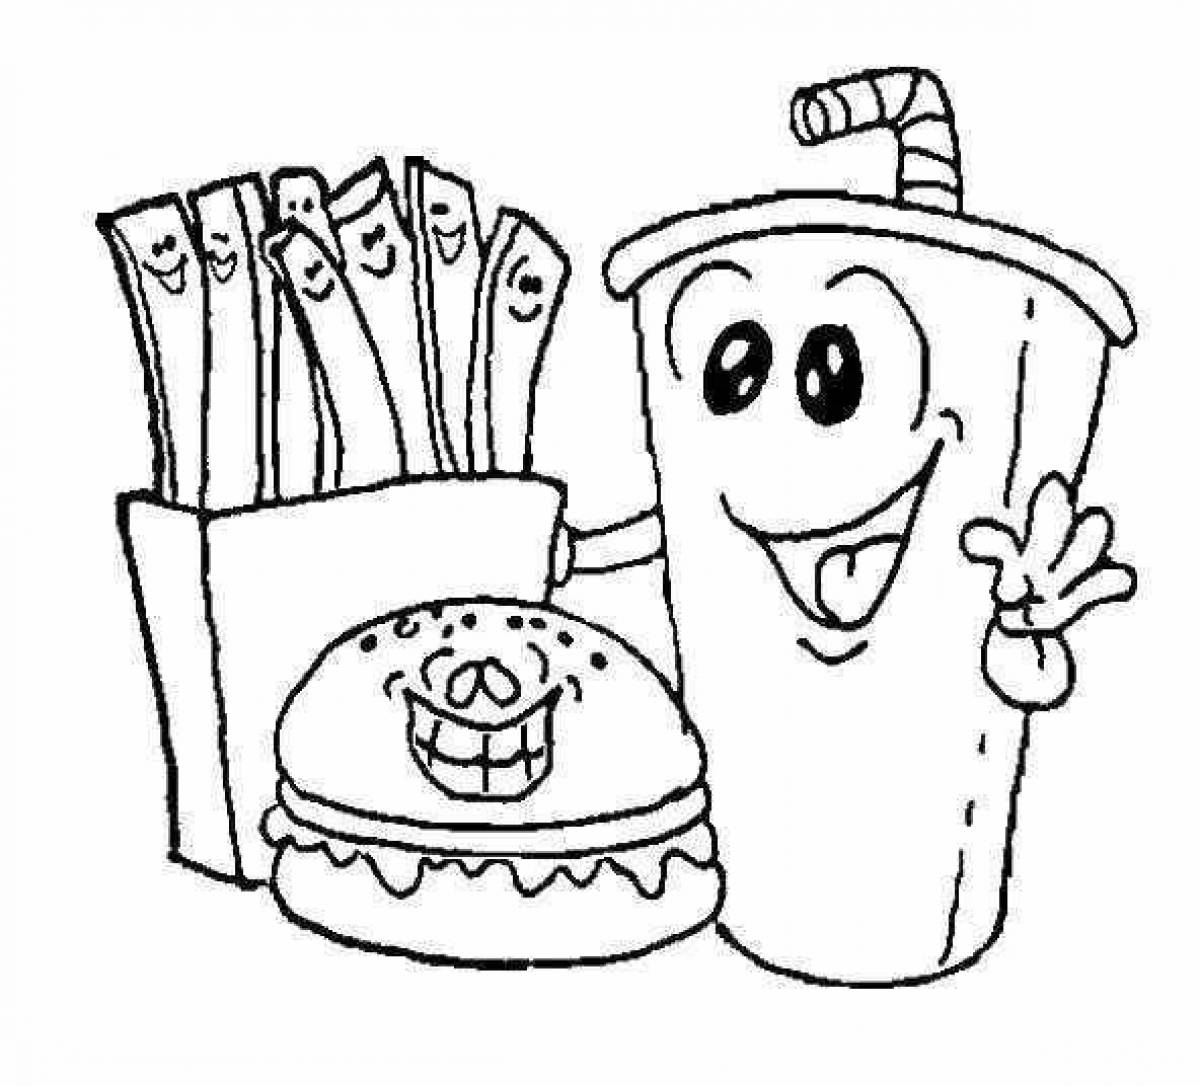 Coloring book nut burger and french fries